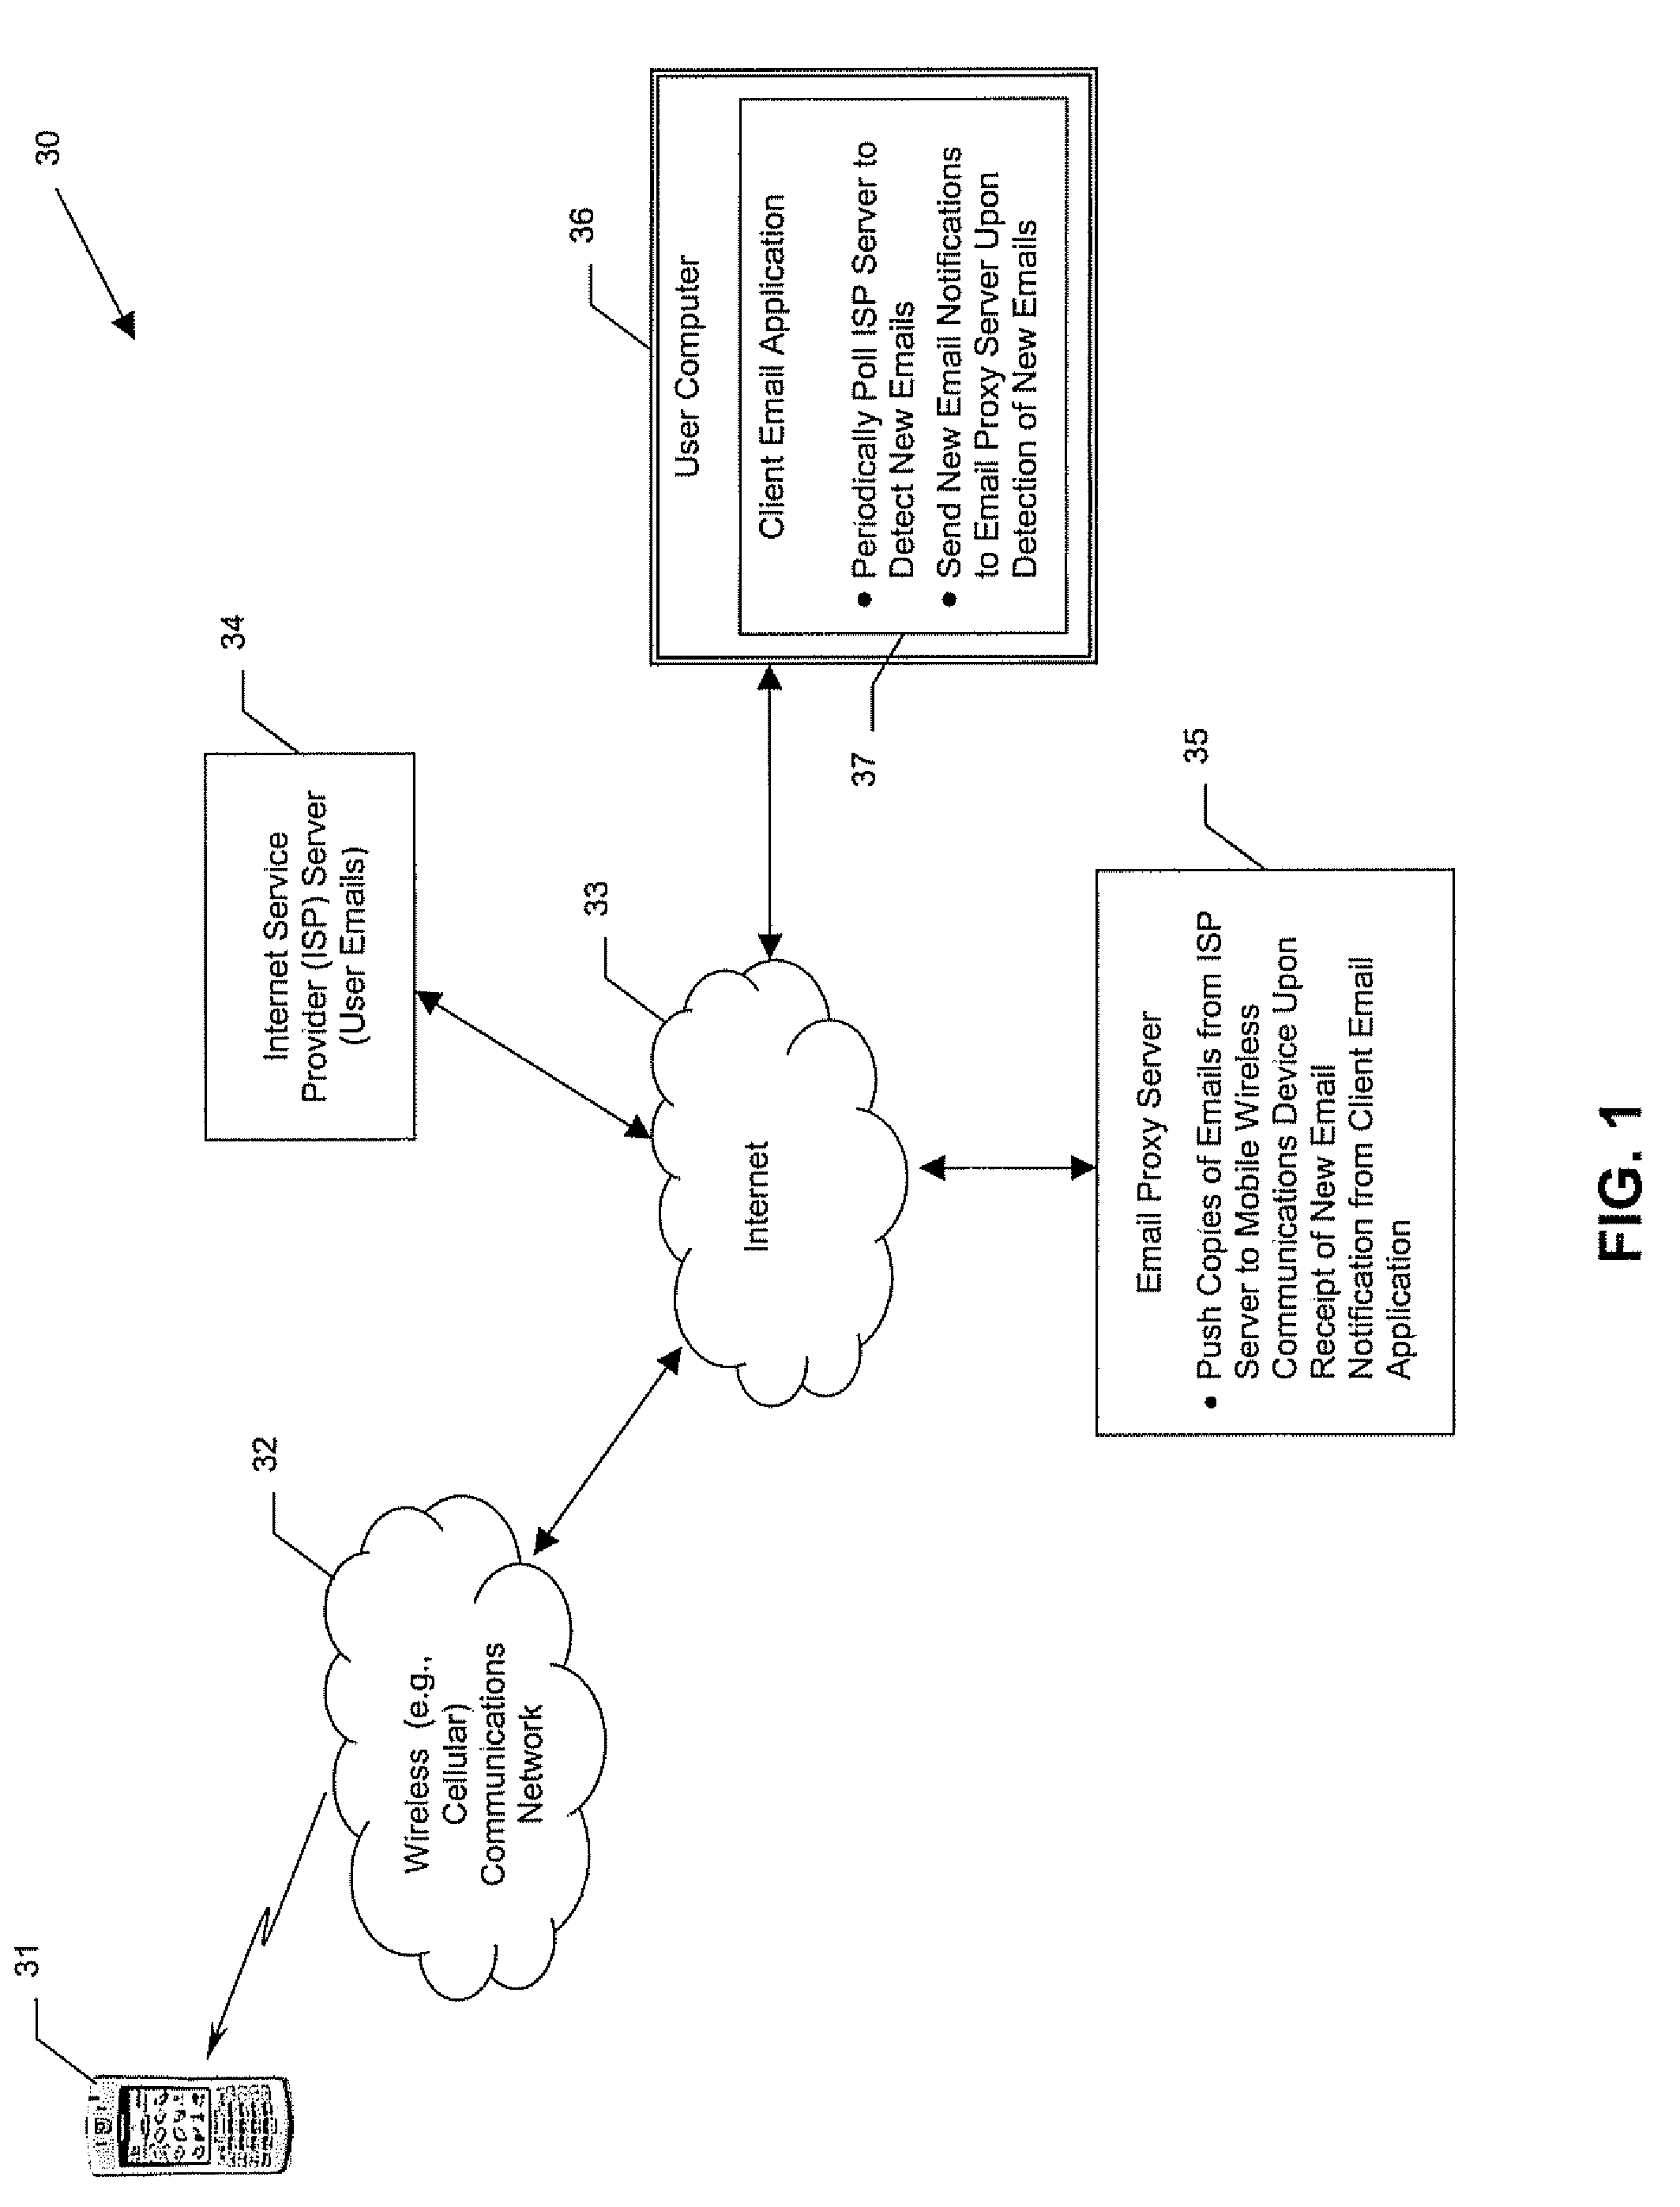 Electronic Mail Communications System with Client Email Internet Service Provider (ISP) Polling Application and Related Methods